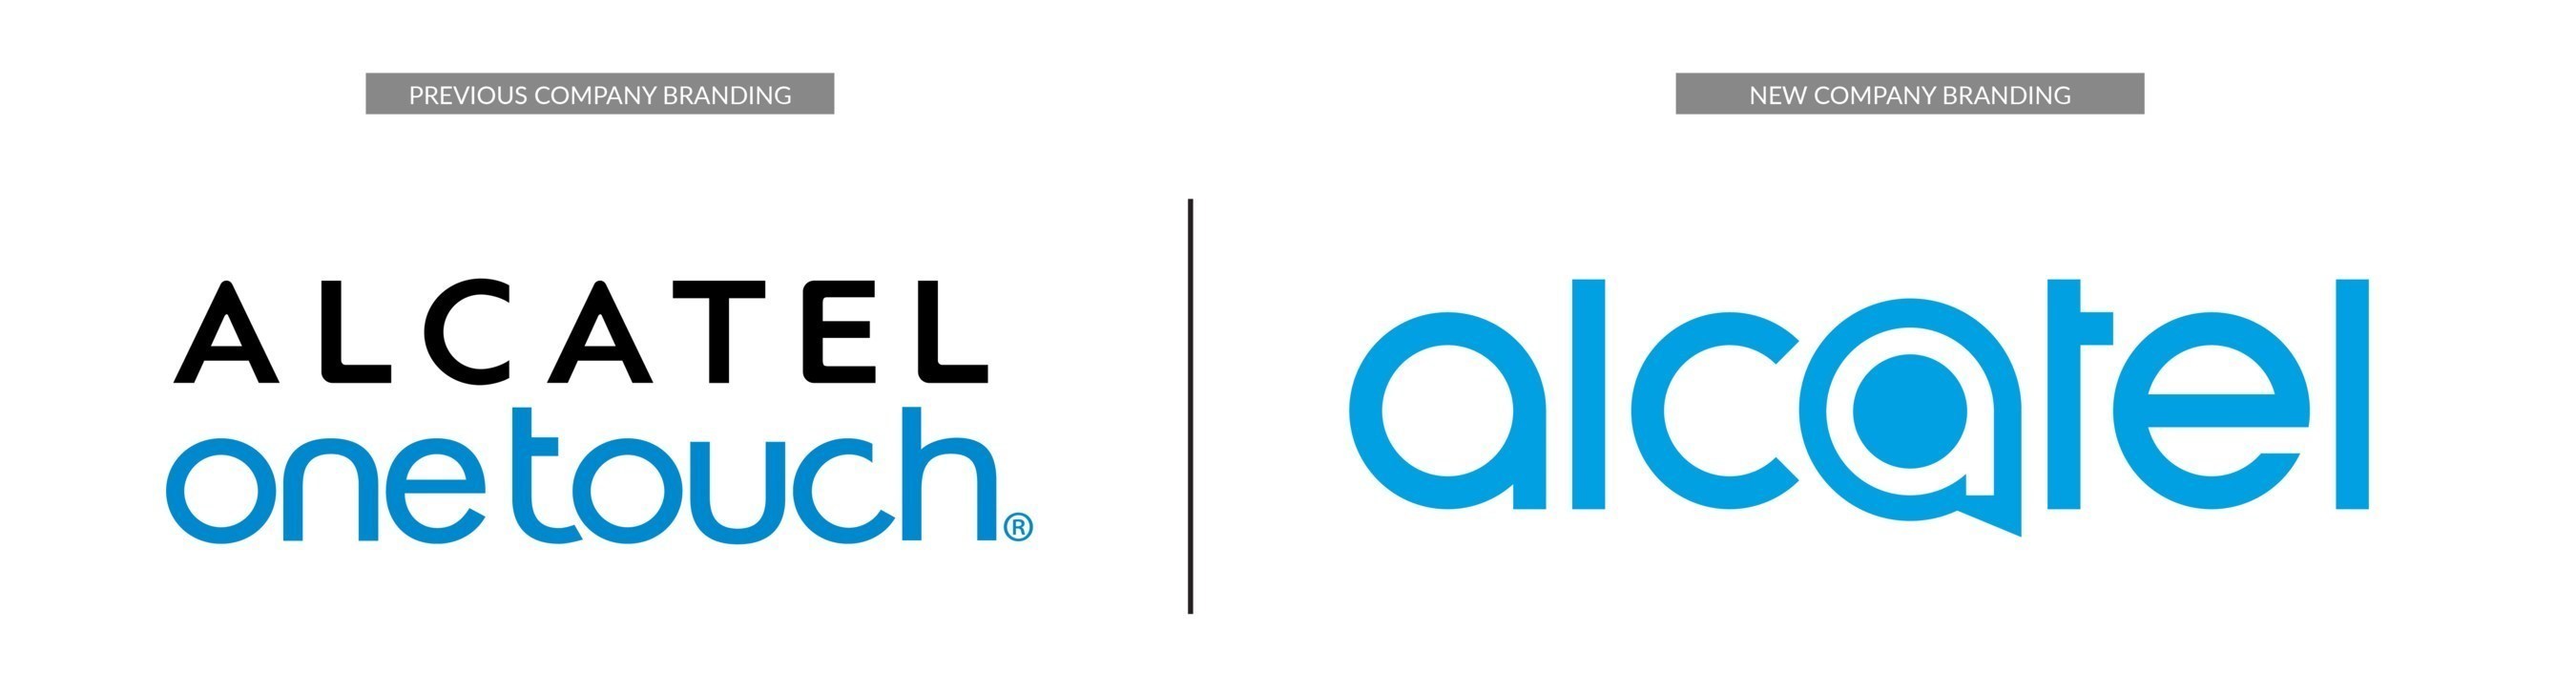 Previous Alcatel branding (Left) versus the new company branding unveiled at 2016 Mobile World Congress (Right).